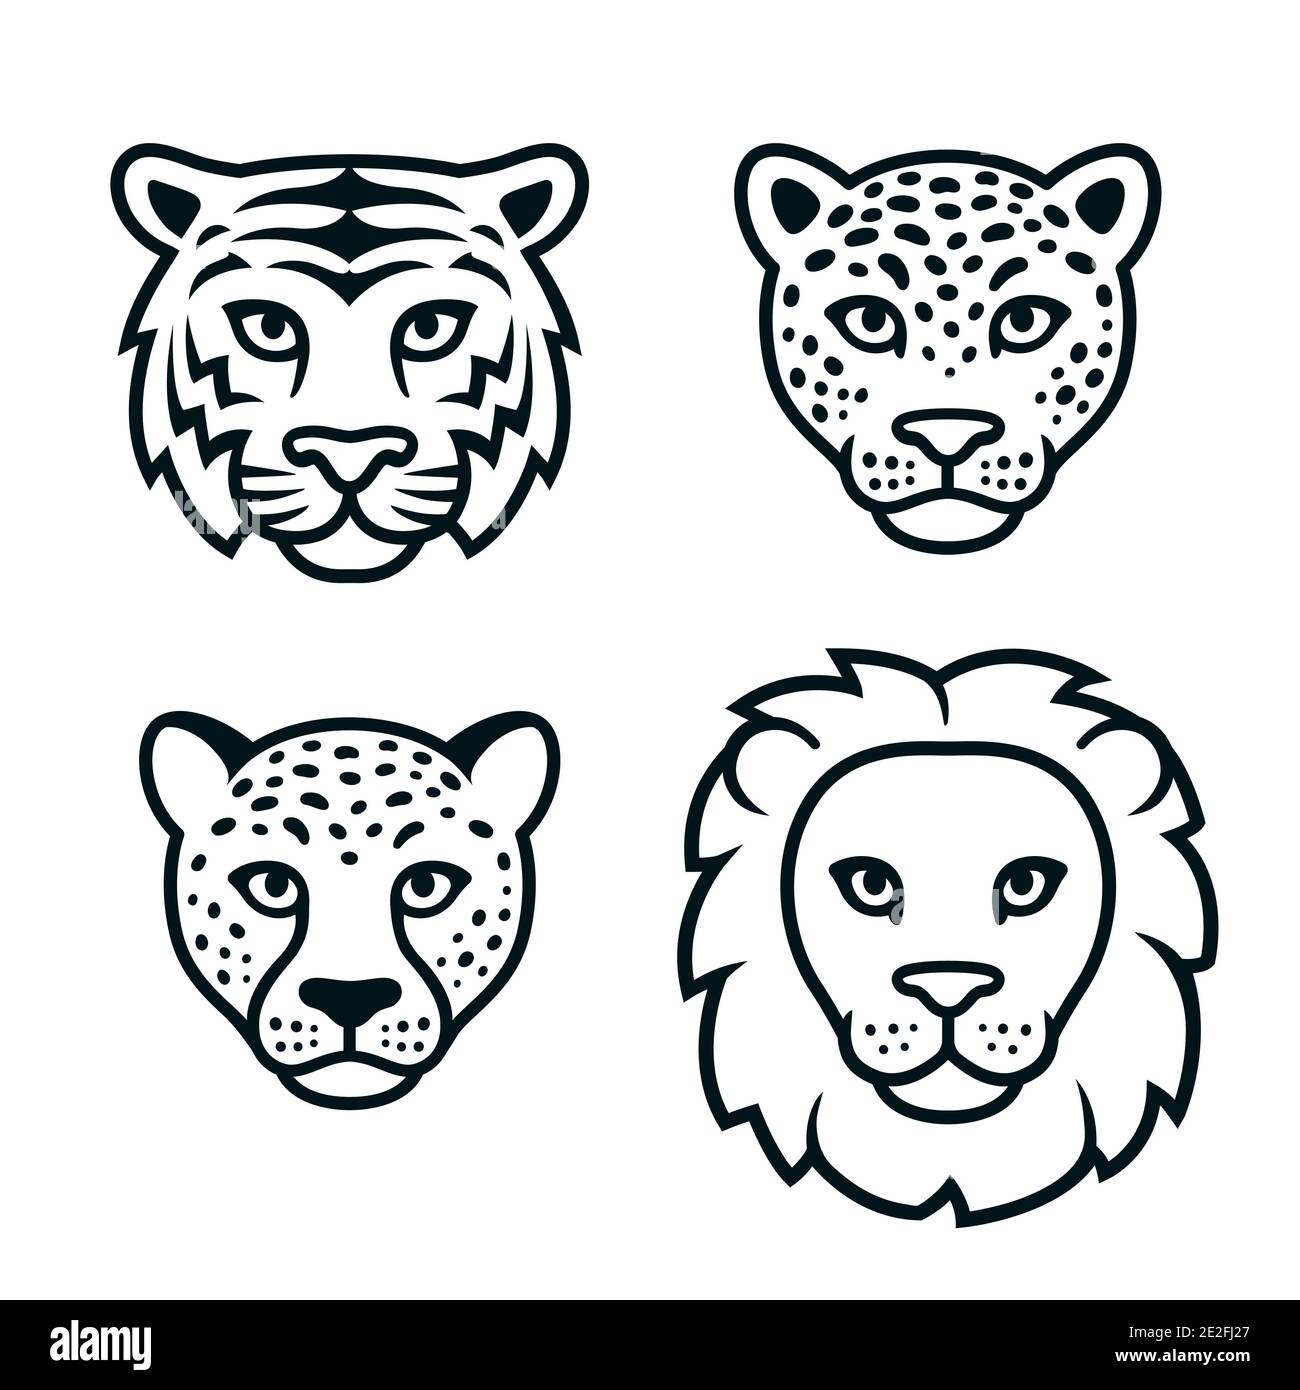 Tiger Drawing Ideas ➤ How to draw a Tiger